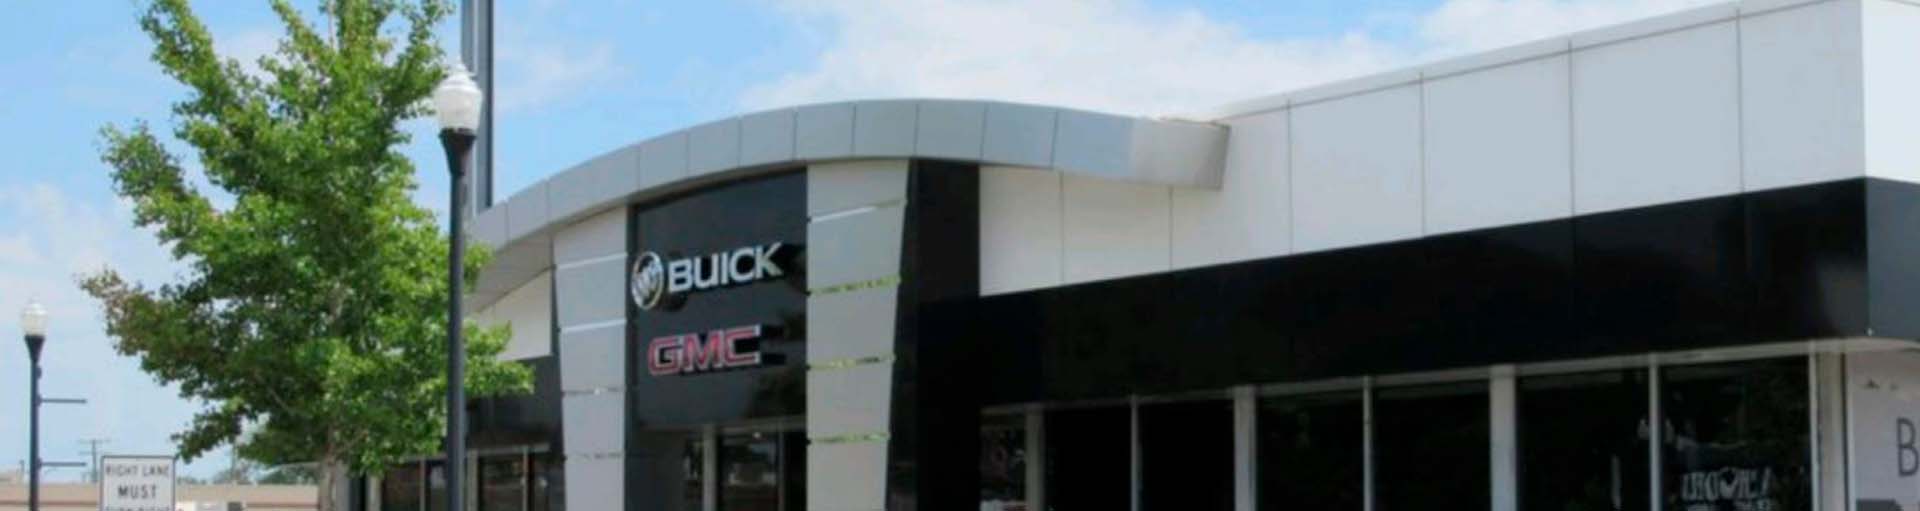 image of LaFontaine GMC Buick Dearborn dealership